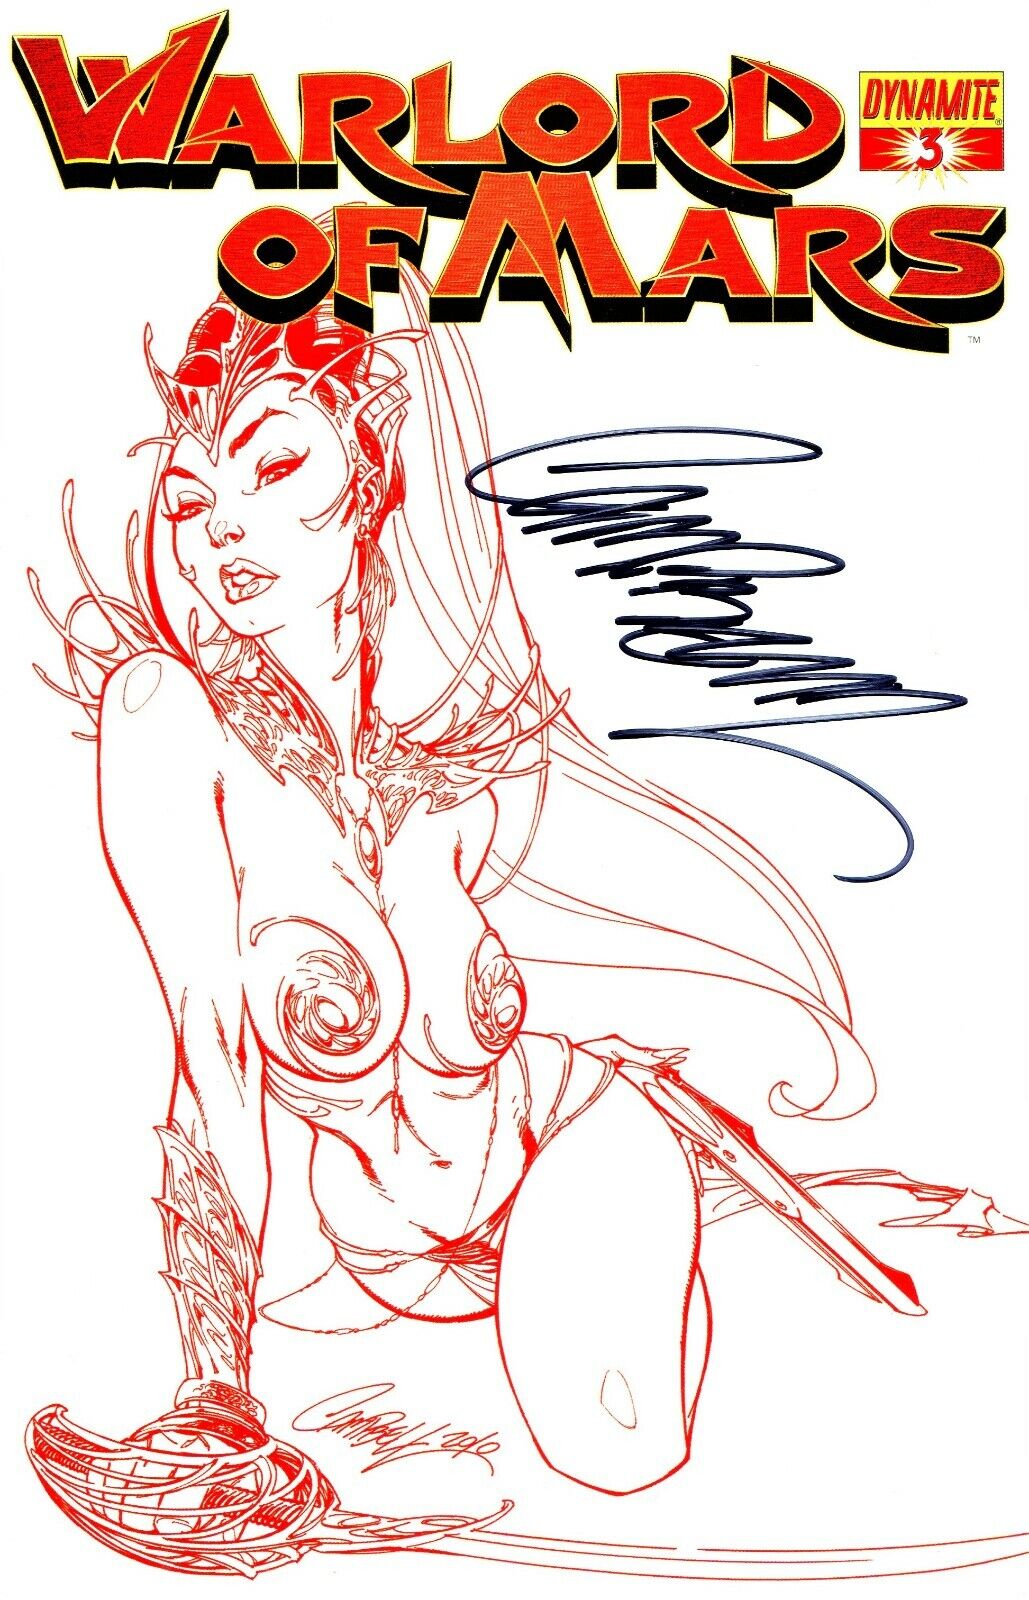 WARLORD OF MARS #3 VARIANT EDITION SIGNED BY ARTIST J. SCOTT CAMPBELL